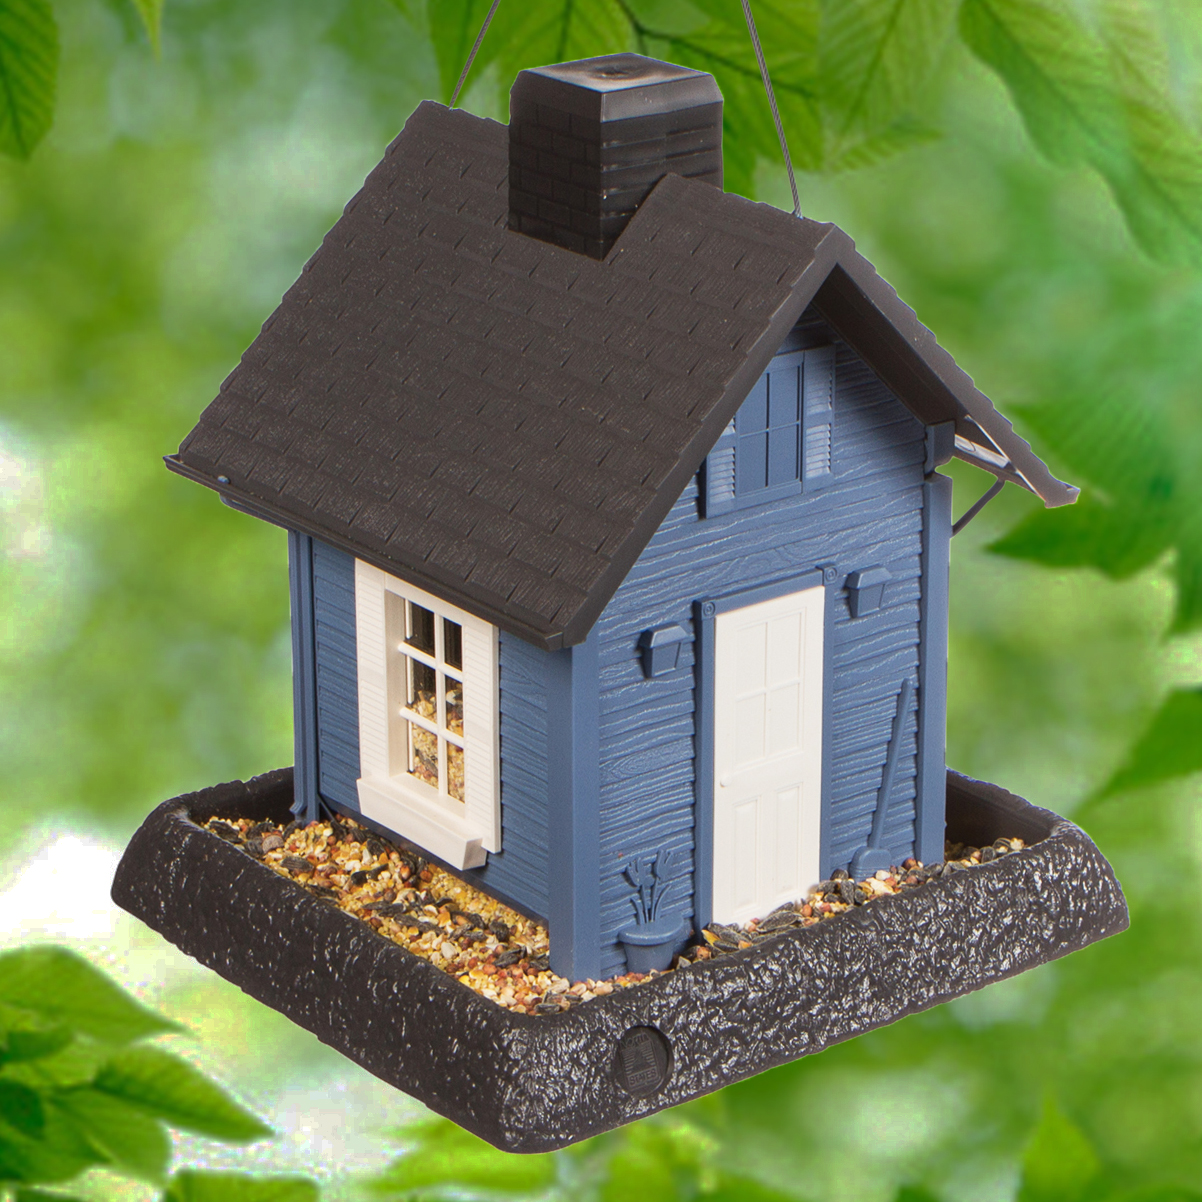 North States Village Collection Blue Cottage Bird Feeder, 5 lb. Capacity - image 1 of 7